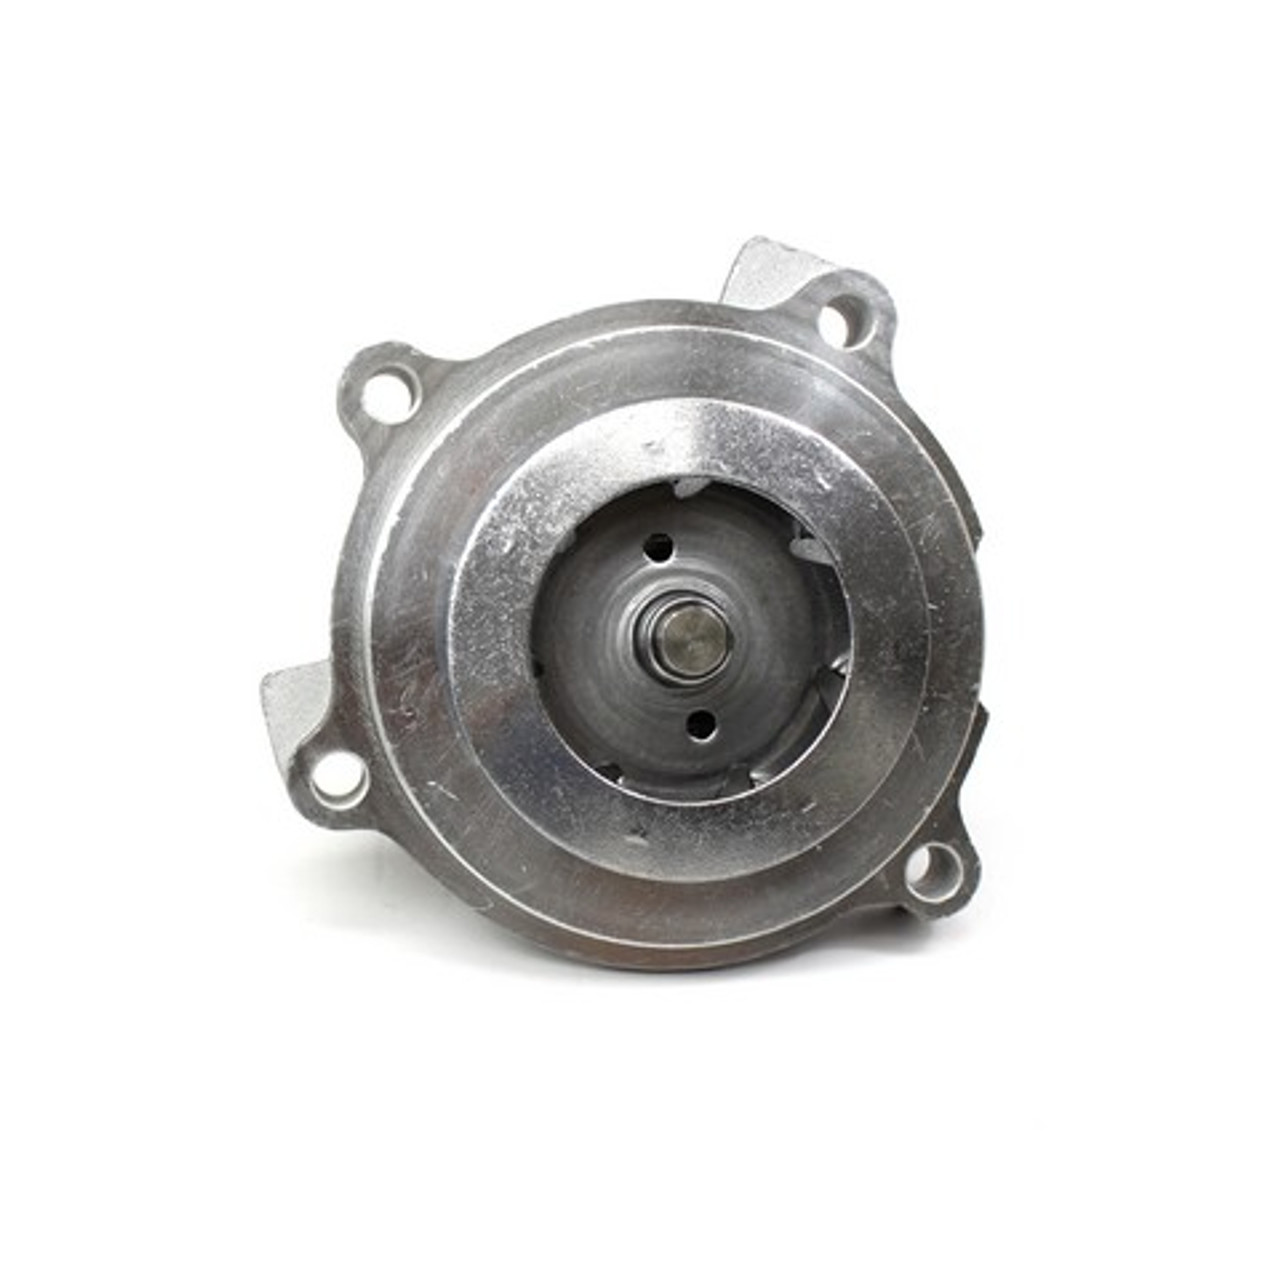 Water Pump 4.6L 2004 Ford Crown Victoria - WP4136.7